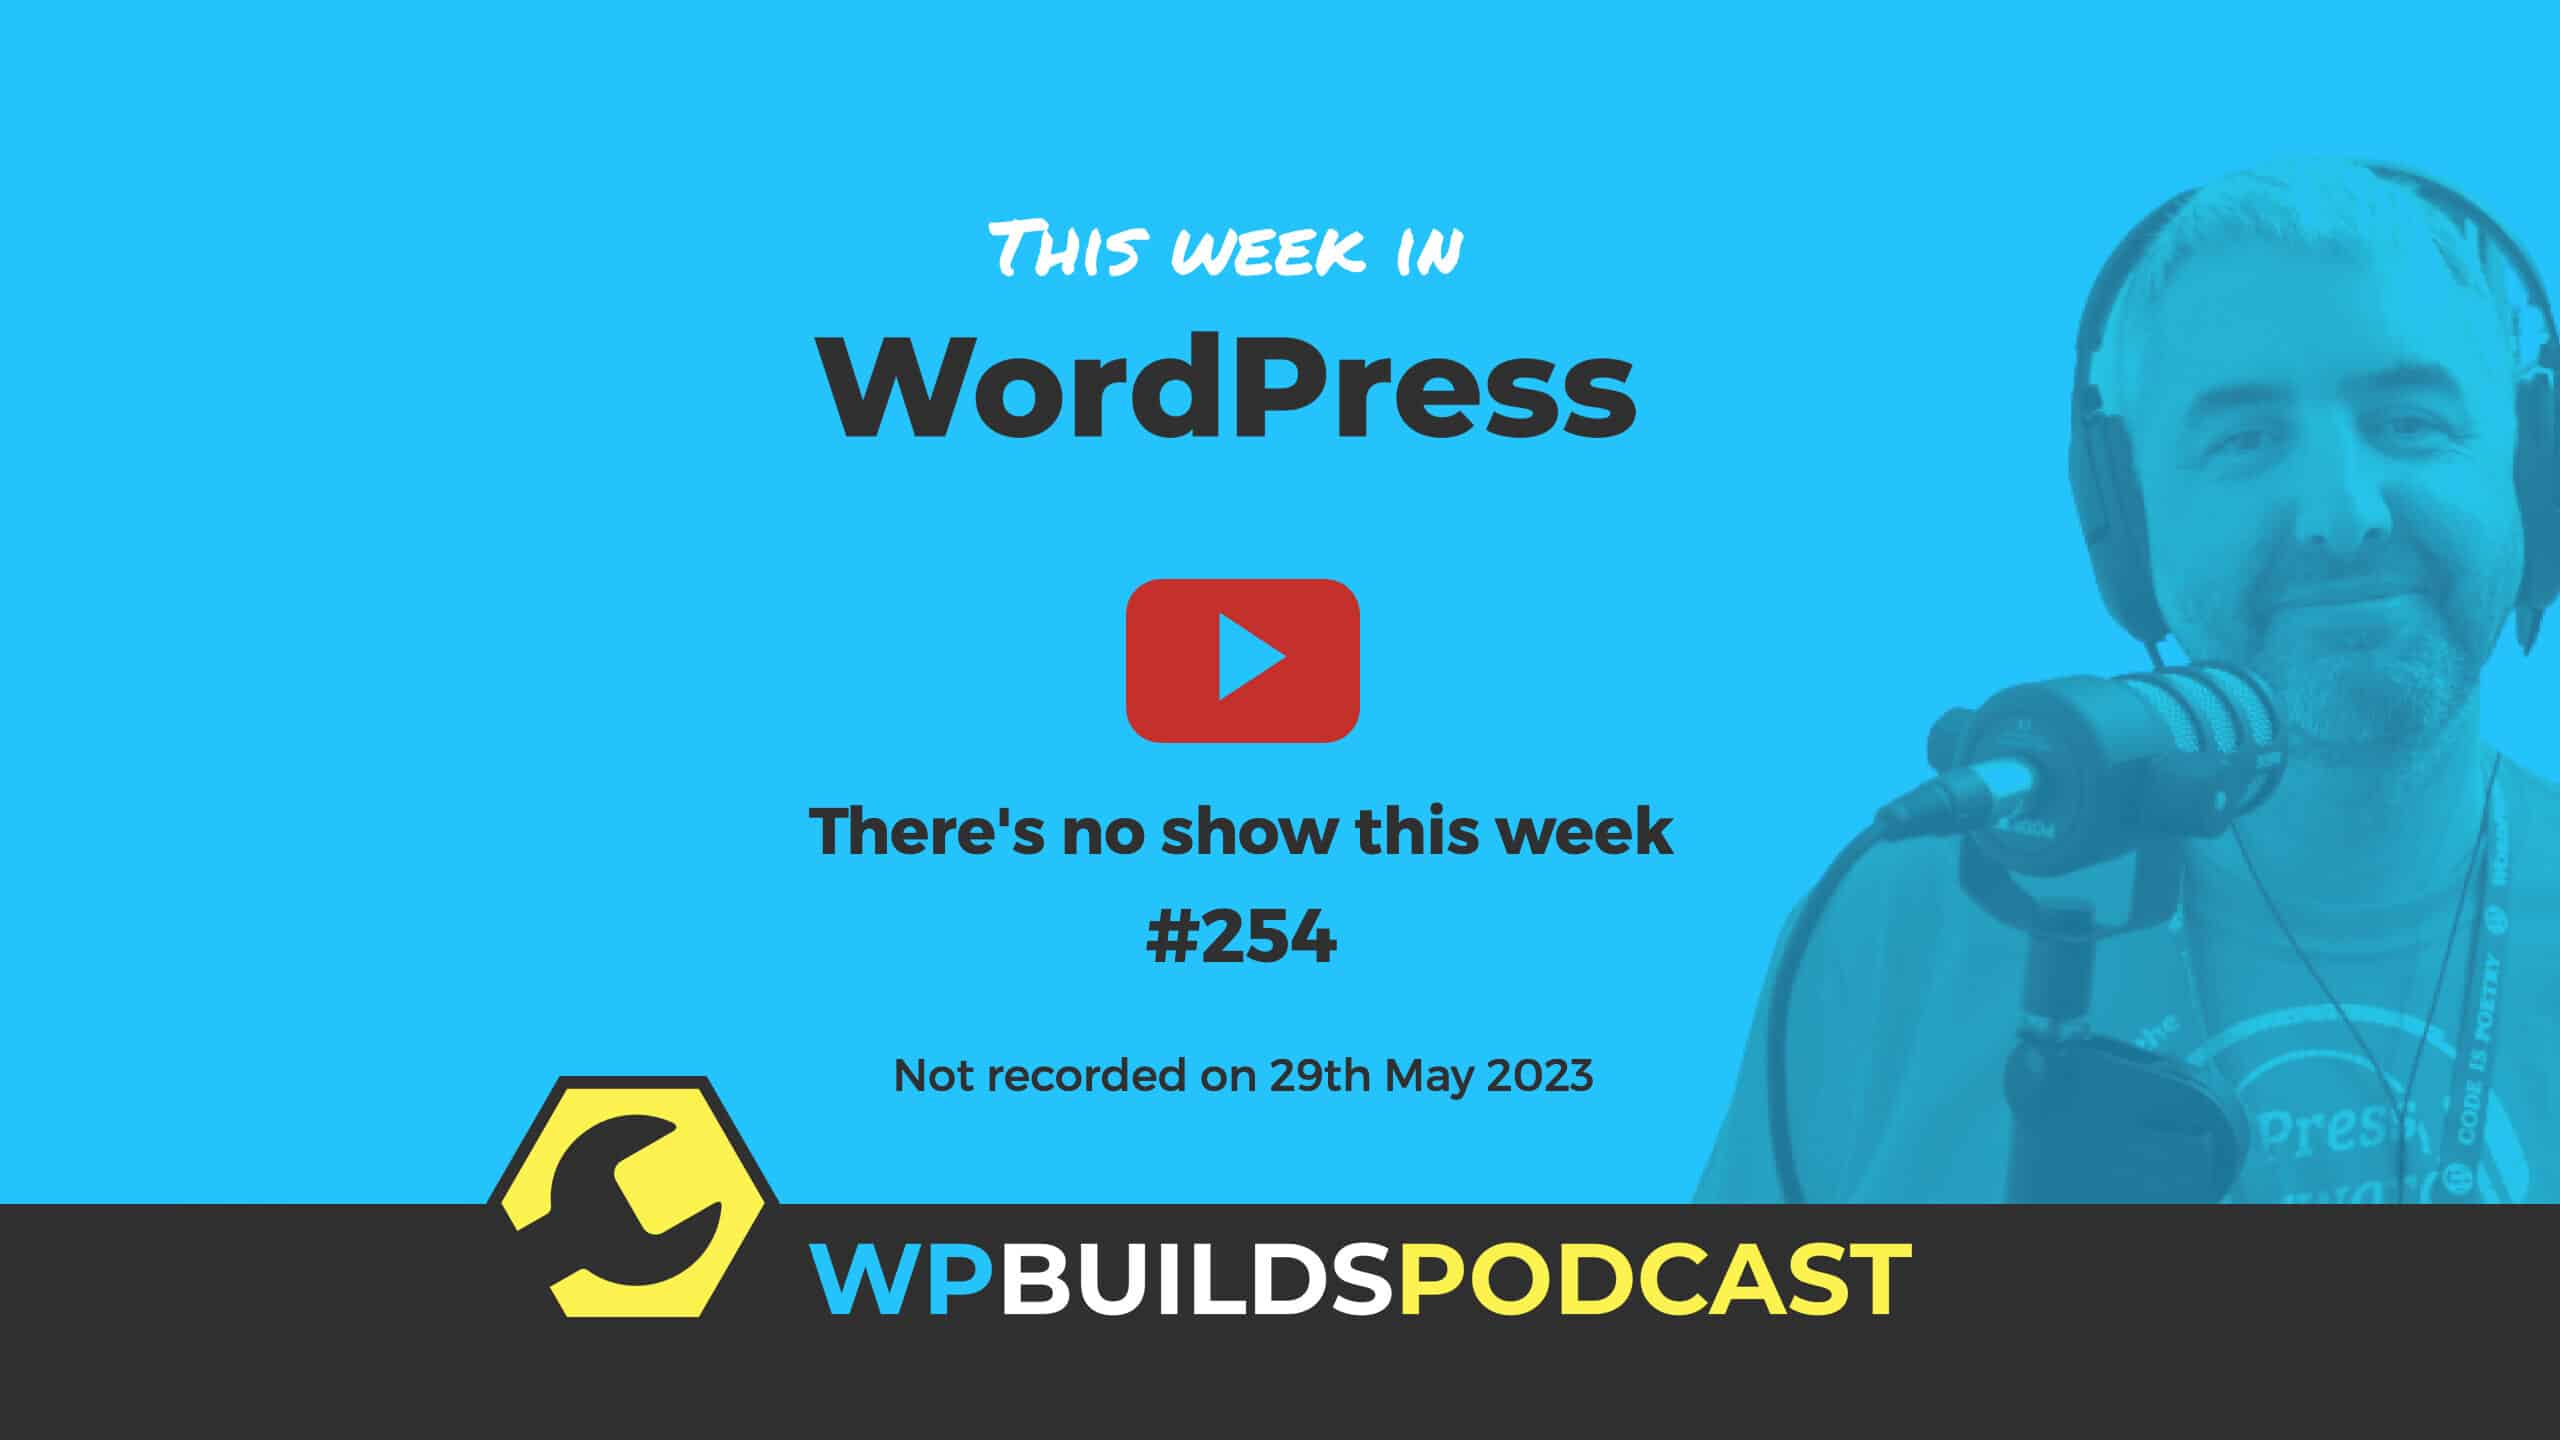 "There's no show this week" - This Week in WordPress #254